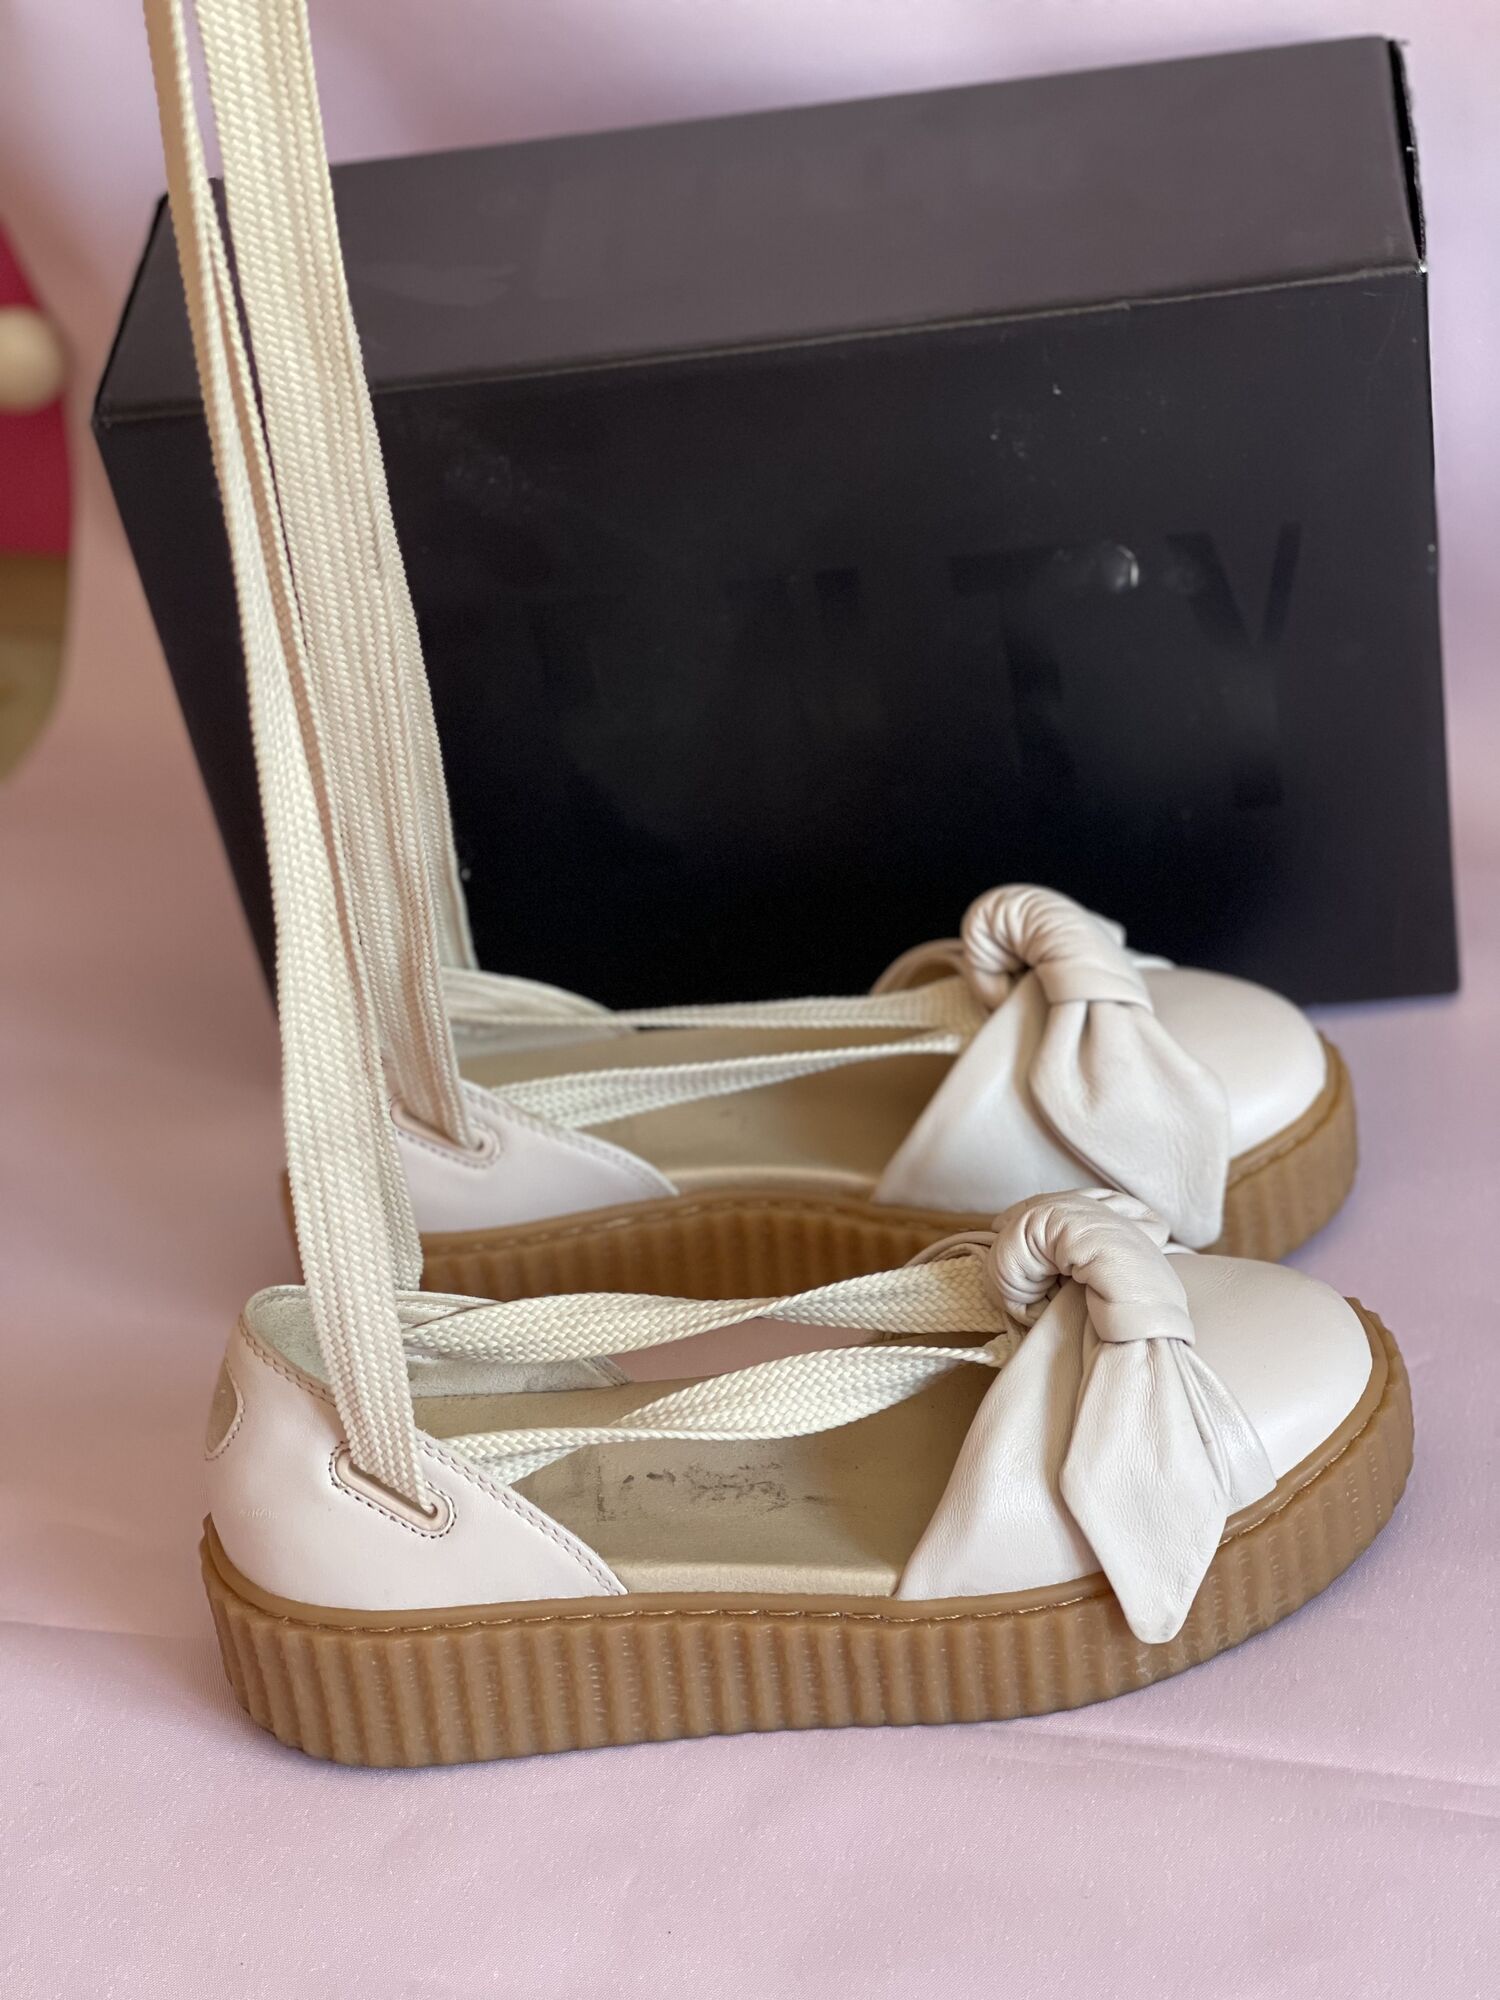 Leather Bow Creeper Sandal Espadrilles Fenty x Puma - 37.5, pre-owned at 50 EUR